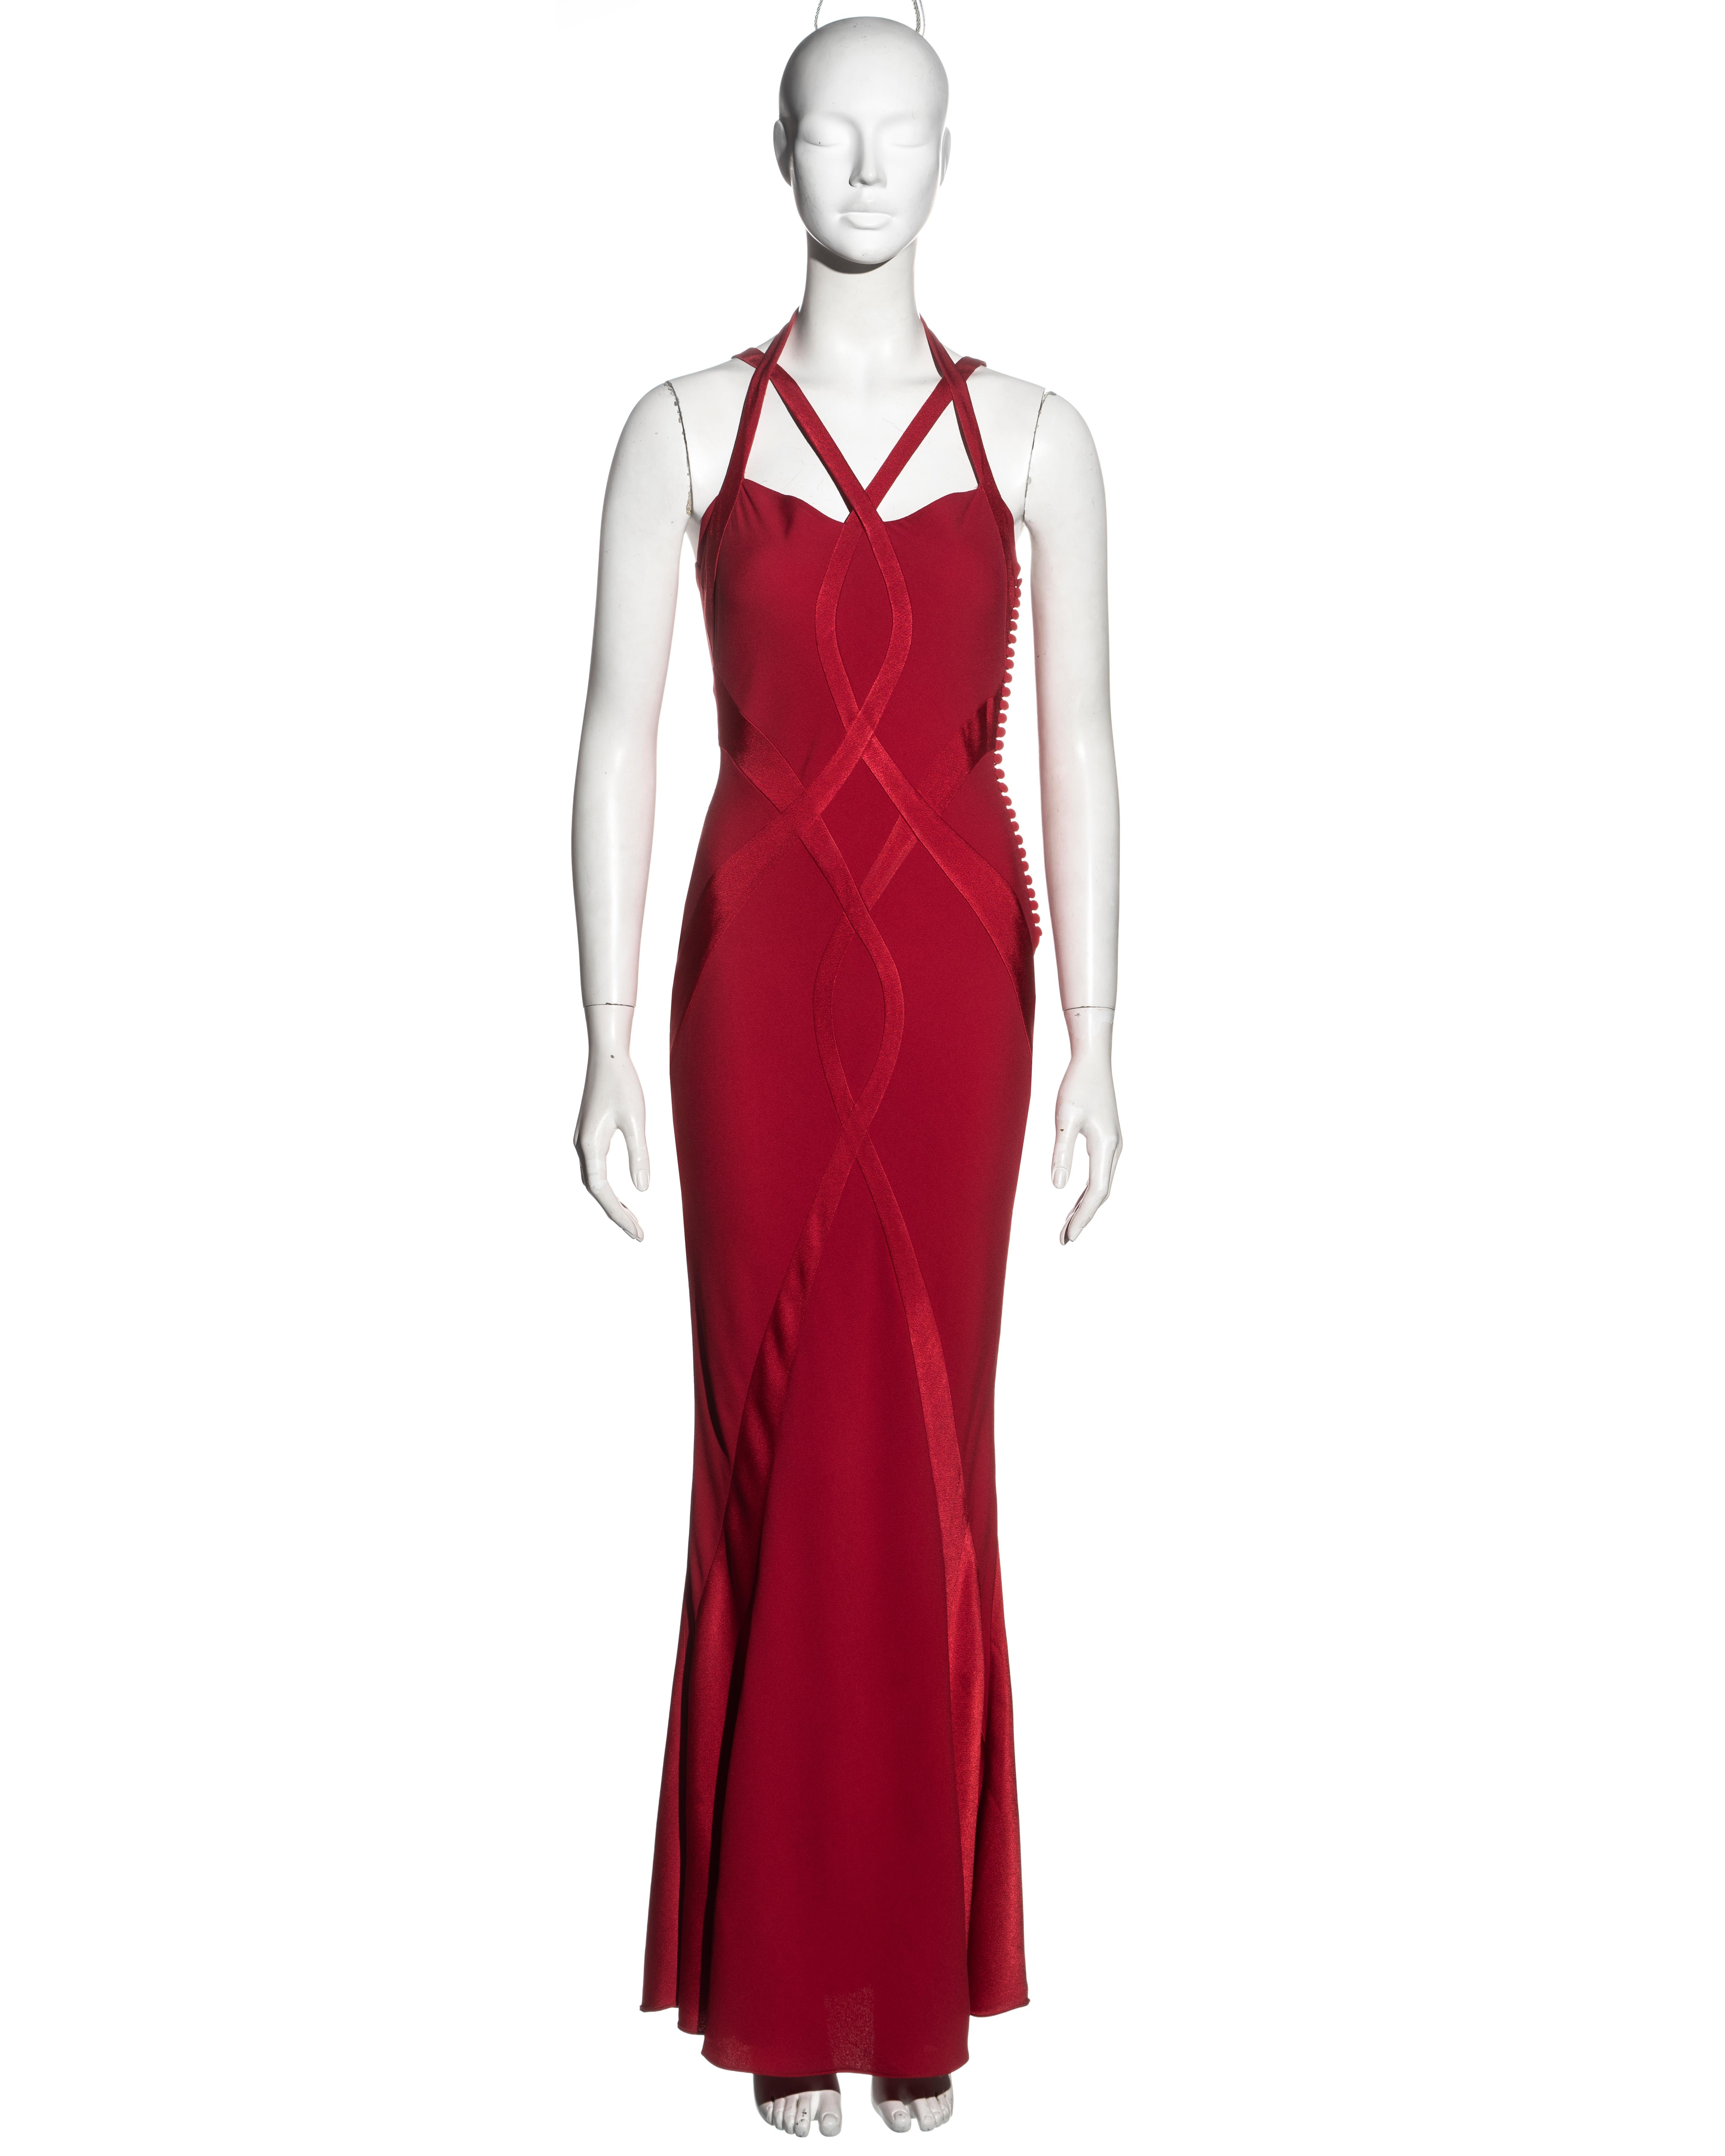 ▪ Christian Dior red evening dress
▪ Designed by John Galliano
▪ Red satin-backed crepe
▪ Multiple curved panels
▪ Halter neck and shoulder straps
▪ Floor-length skirt
▪ FR 36 - UK 8 - US 4
▪ Fall-Winter 2004
▪ 68% Acetate, 32% Viscose
▪ Made in